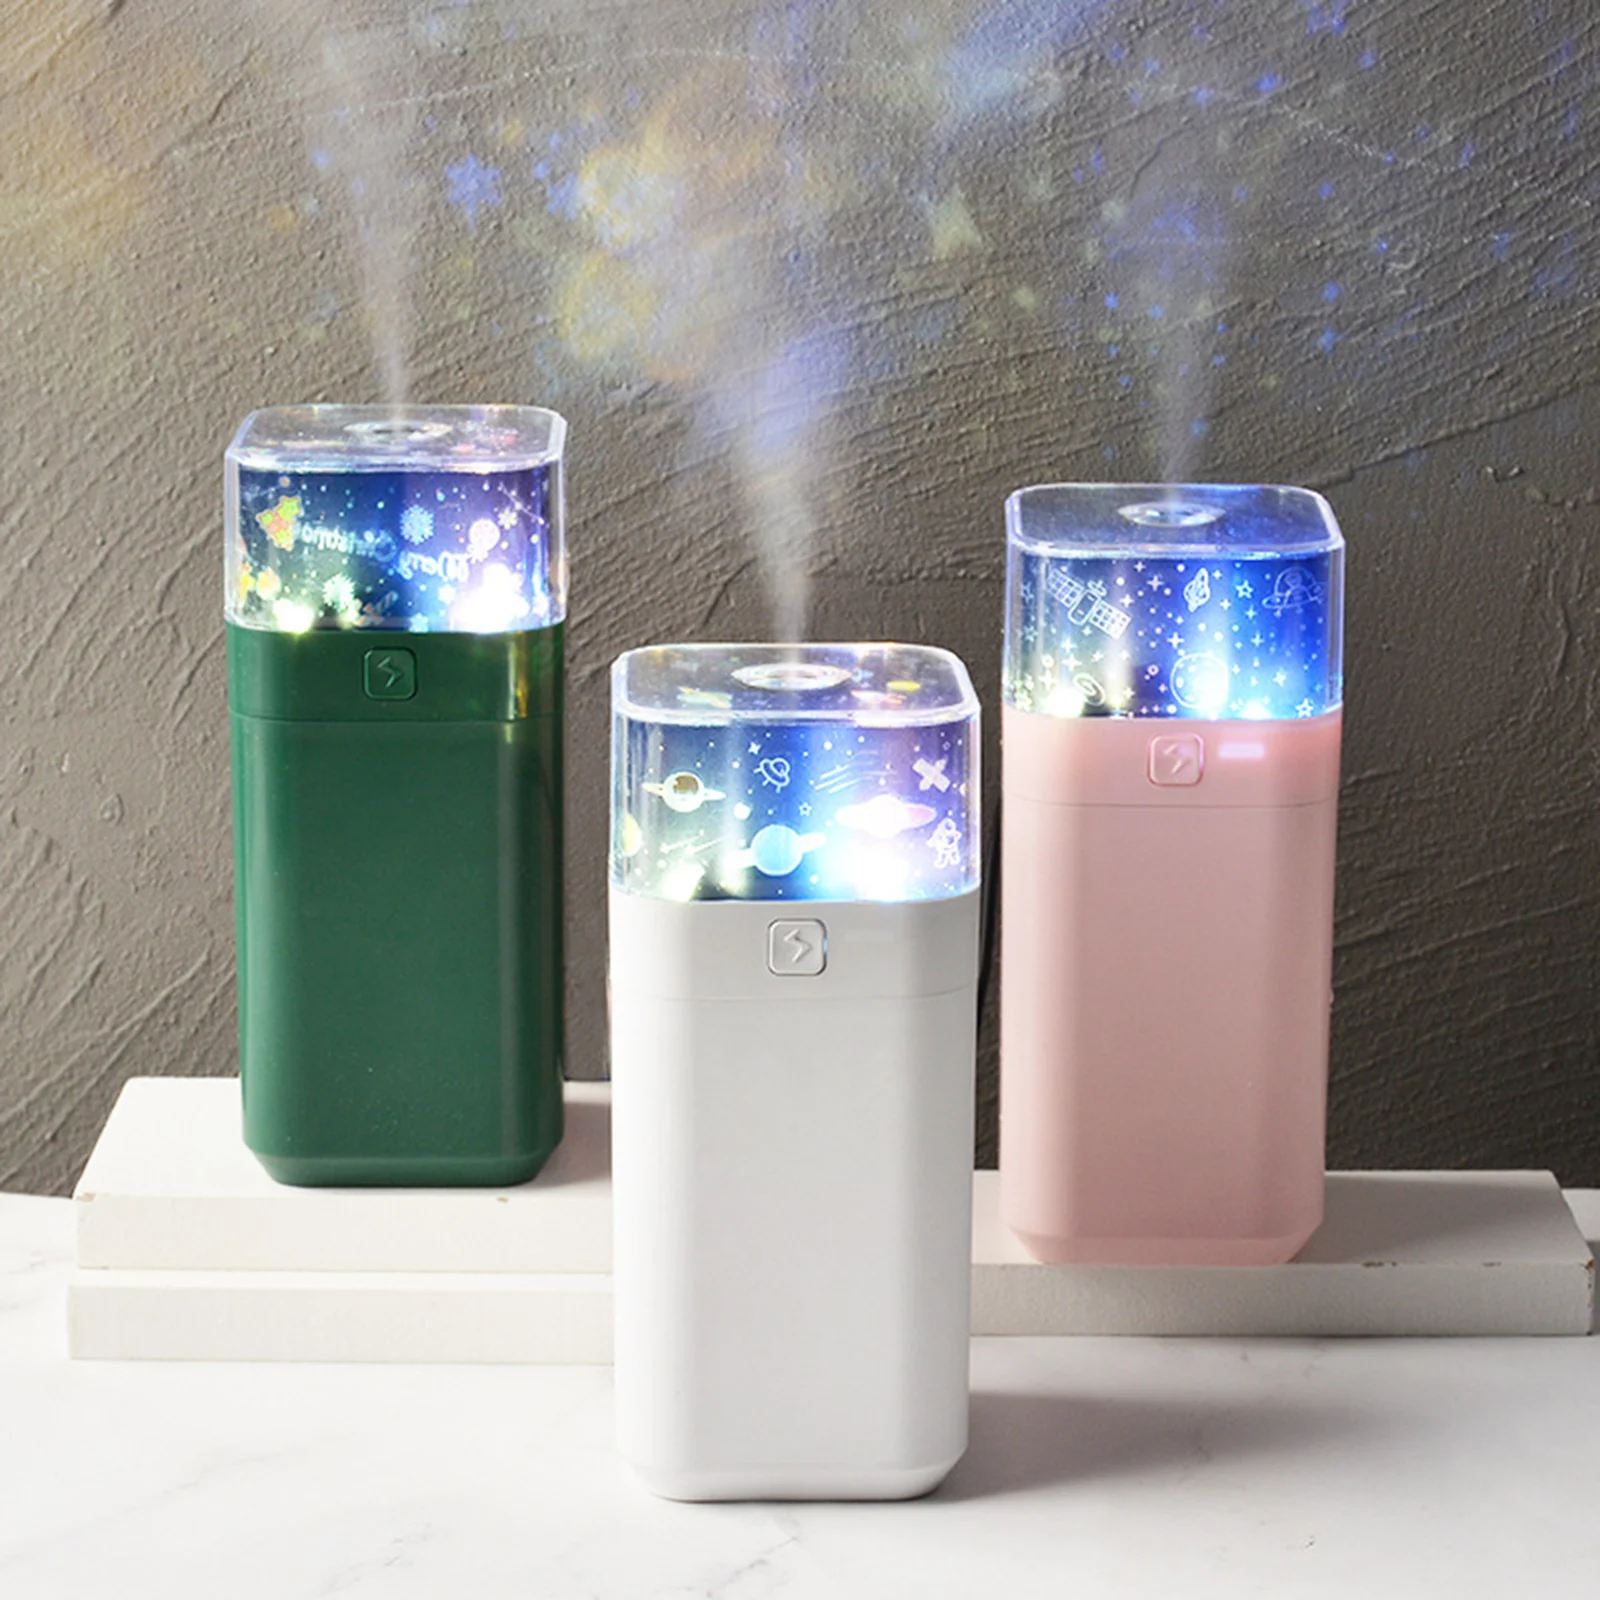 

Air Humidifier Air Humidifier with LED Projection Light For Home Living Room Air Aromatherapy Diffuser Essential Oil Mist Maker